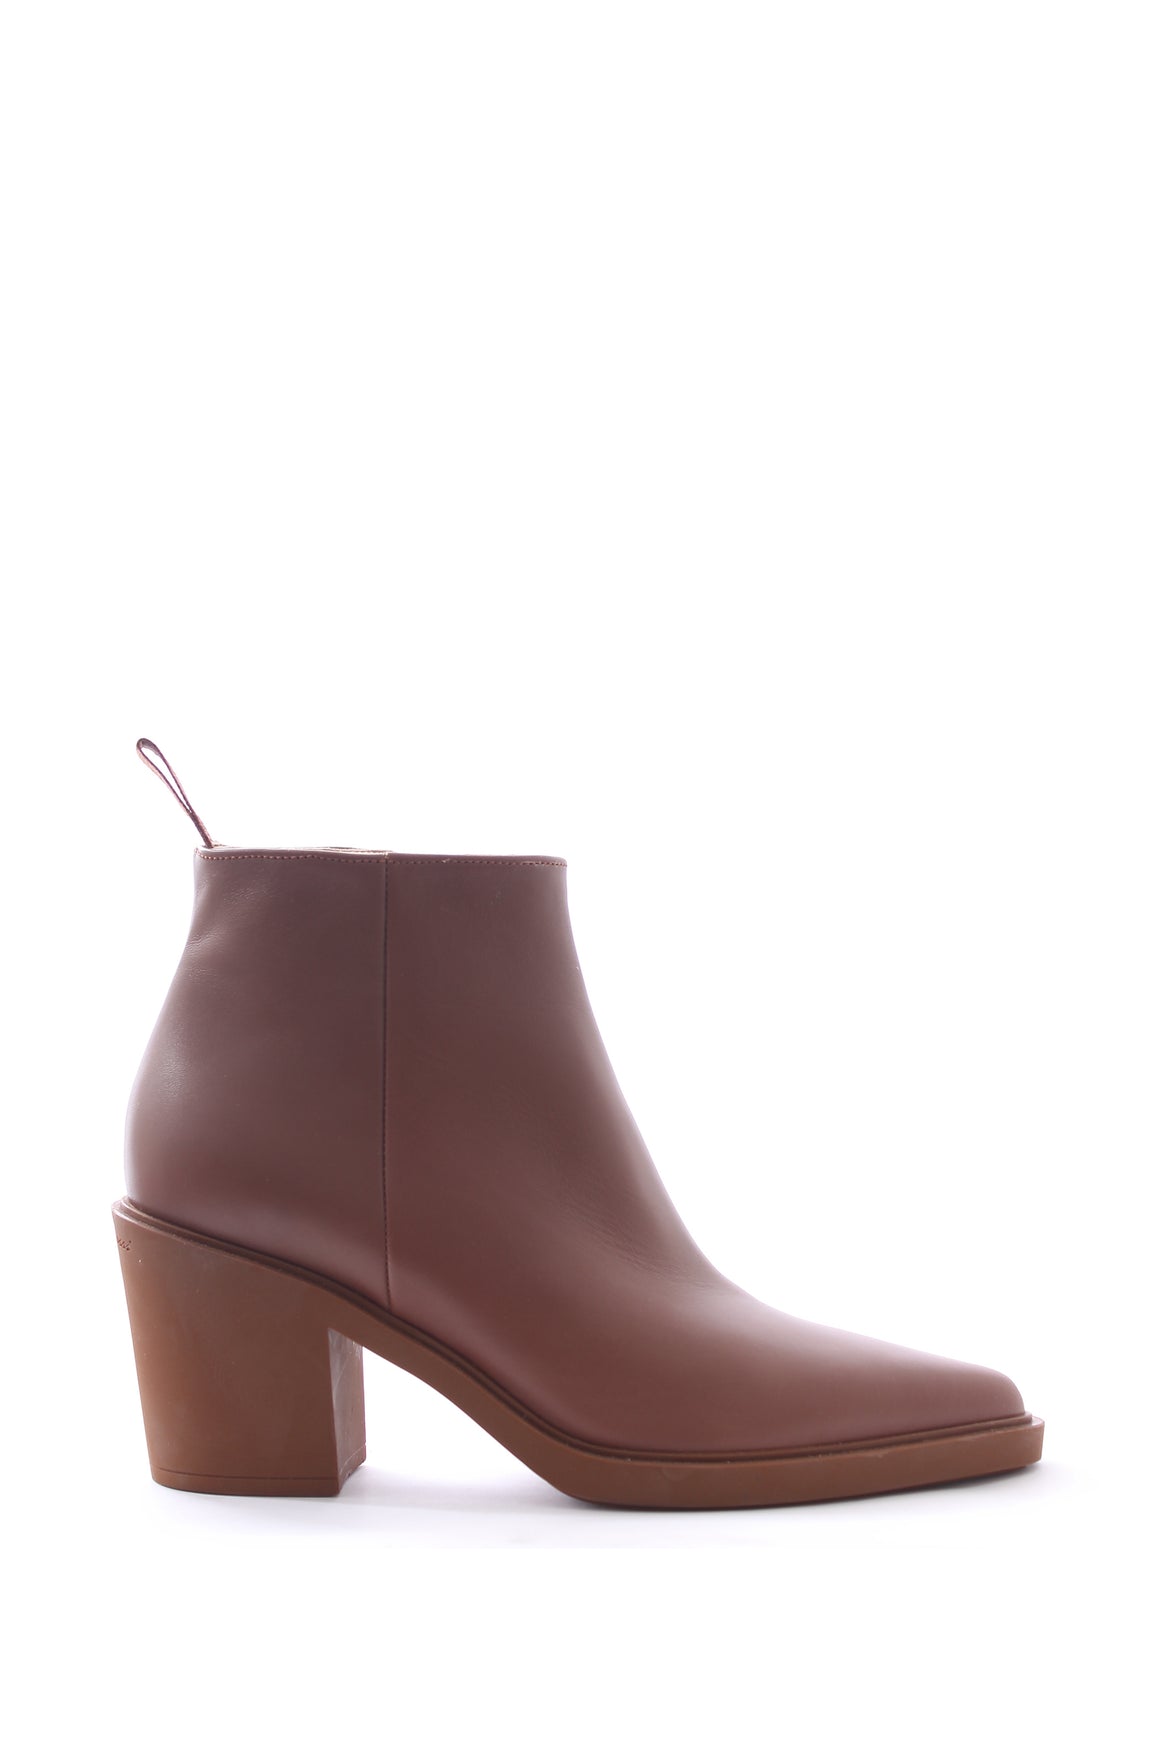 Gianvito Rossi Western Leather Ankle Boots